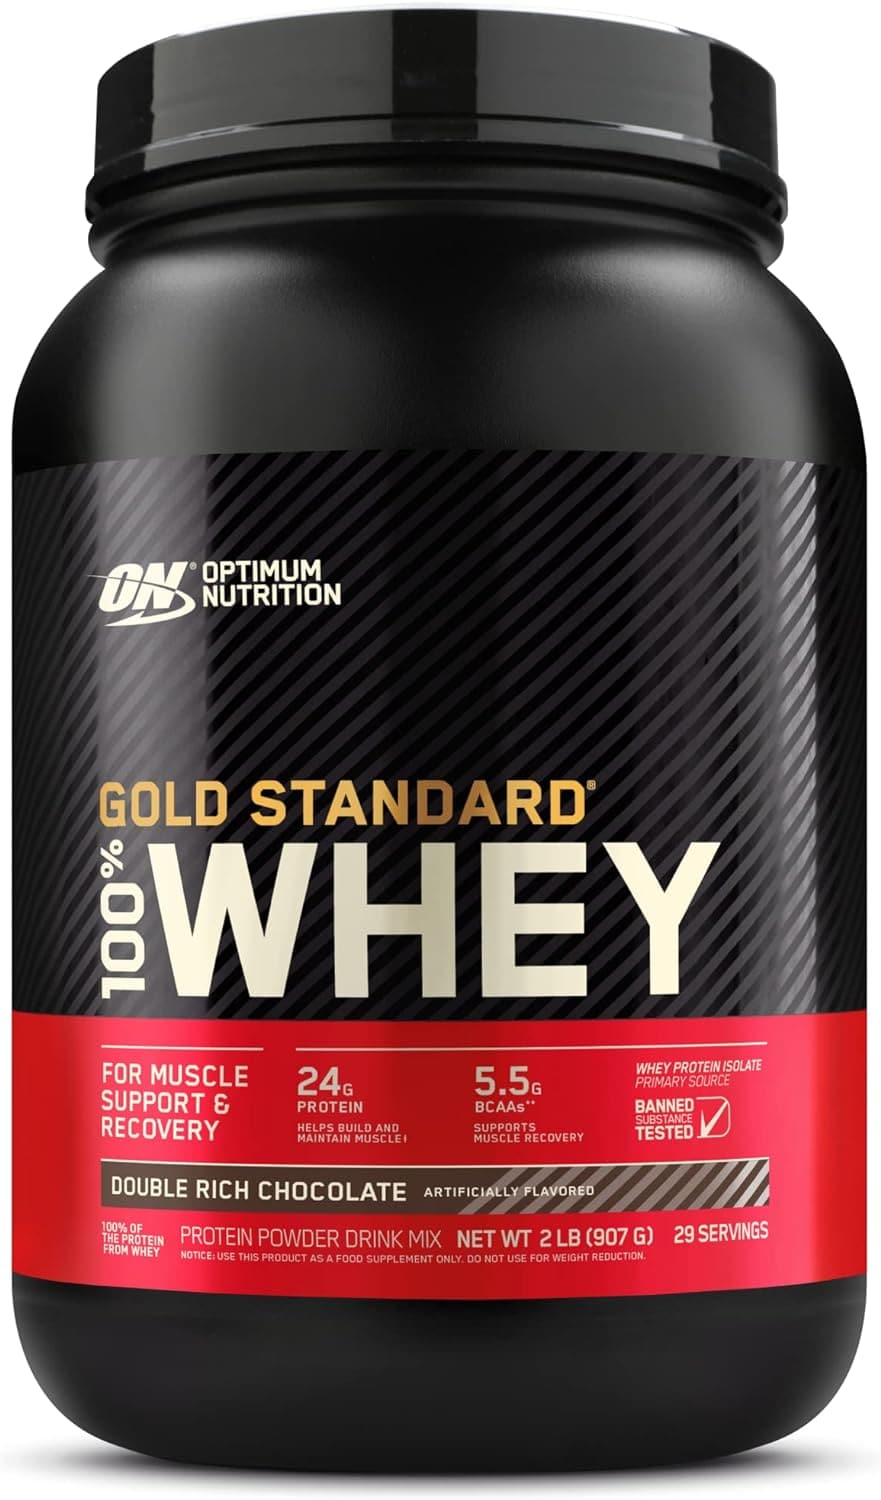 Optimum Nutrition Gold Standard 100% Whey Protein for Post-Workout Muscle Support & Recovery, Double Rich Chocolate, 2 lbs - 907 Grams